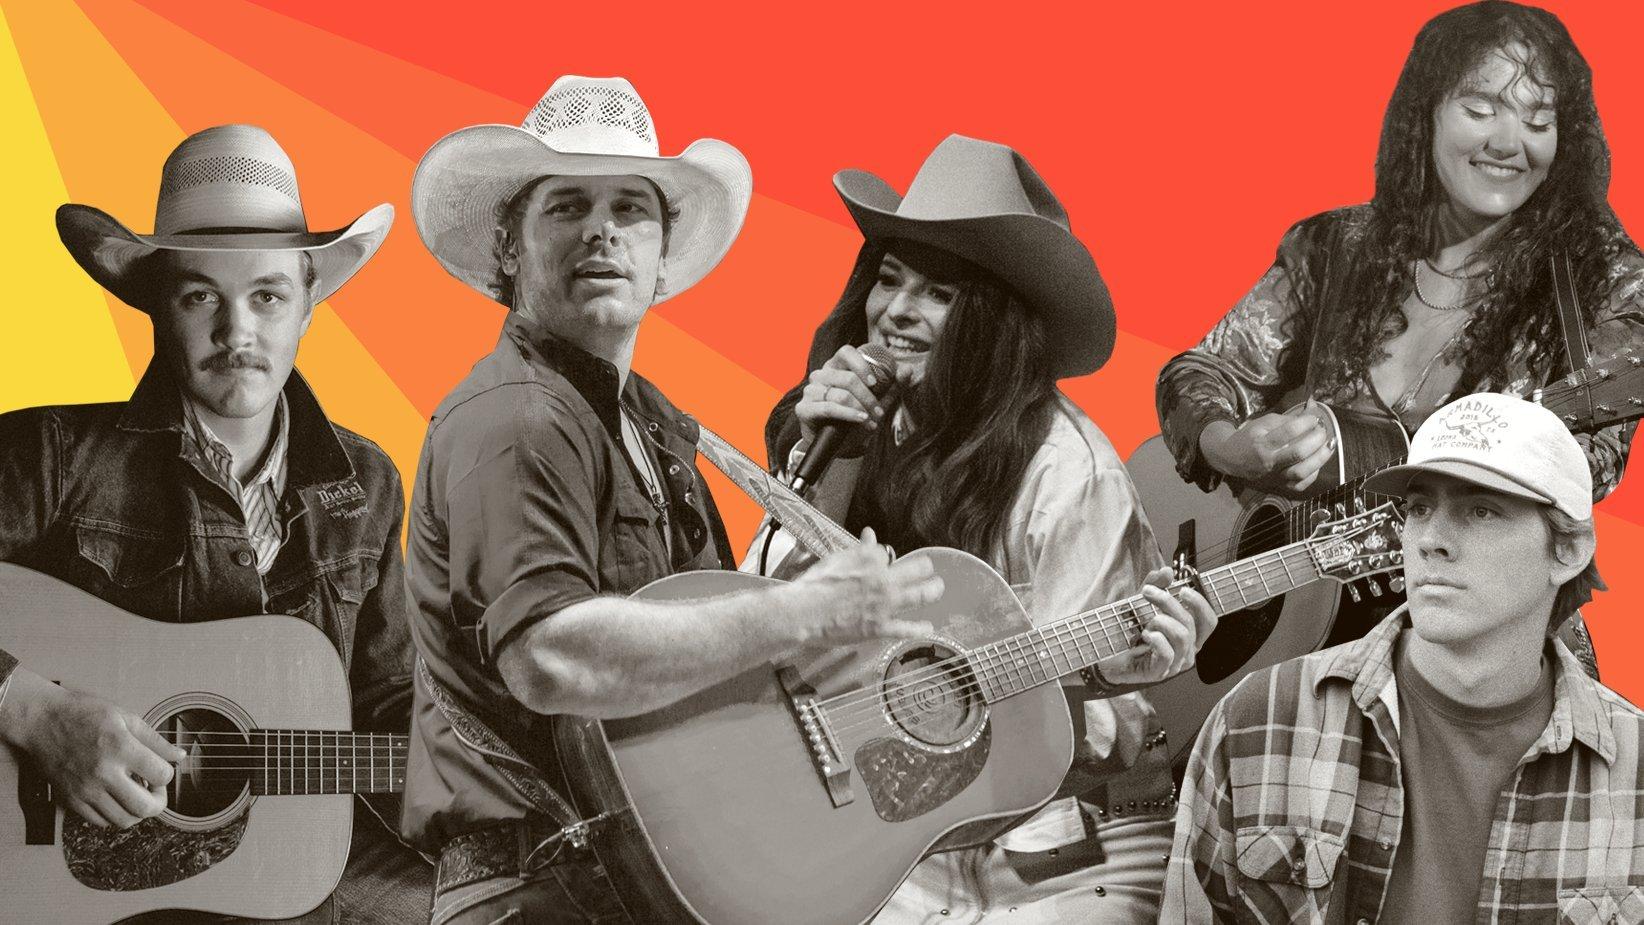 8 Artists Bringing Traditional Country Music Back: Zach Top, Randall King,  Emily Nenni & More On Why What's Old Becomes Beloved Again